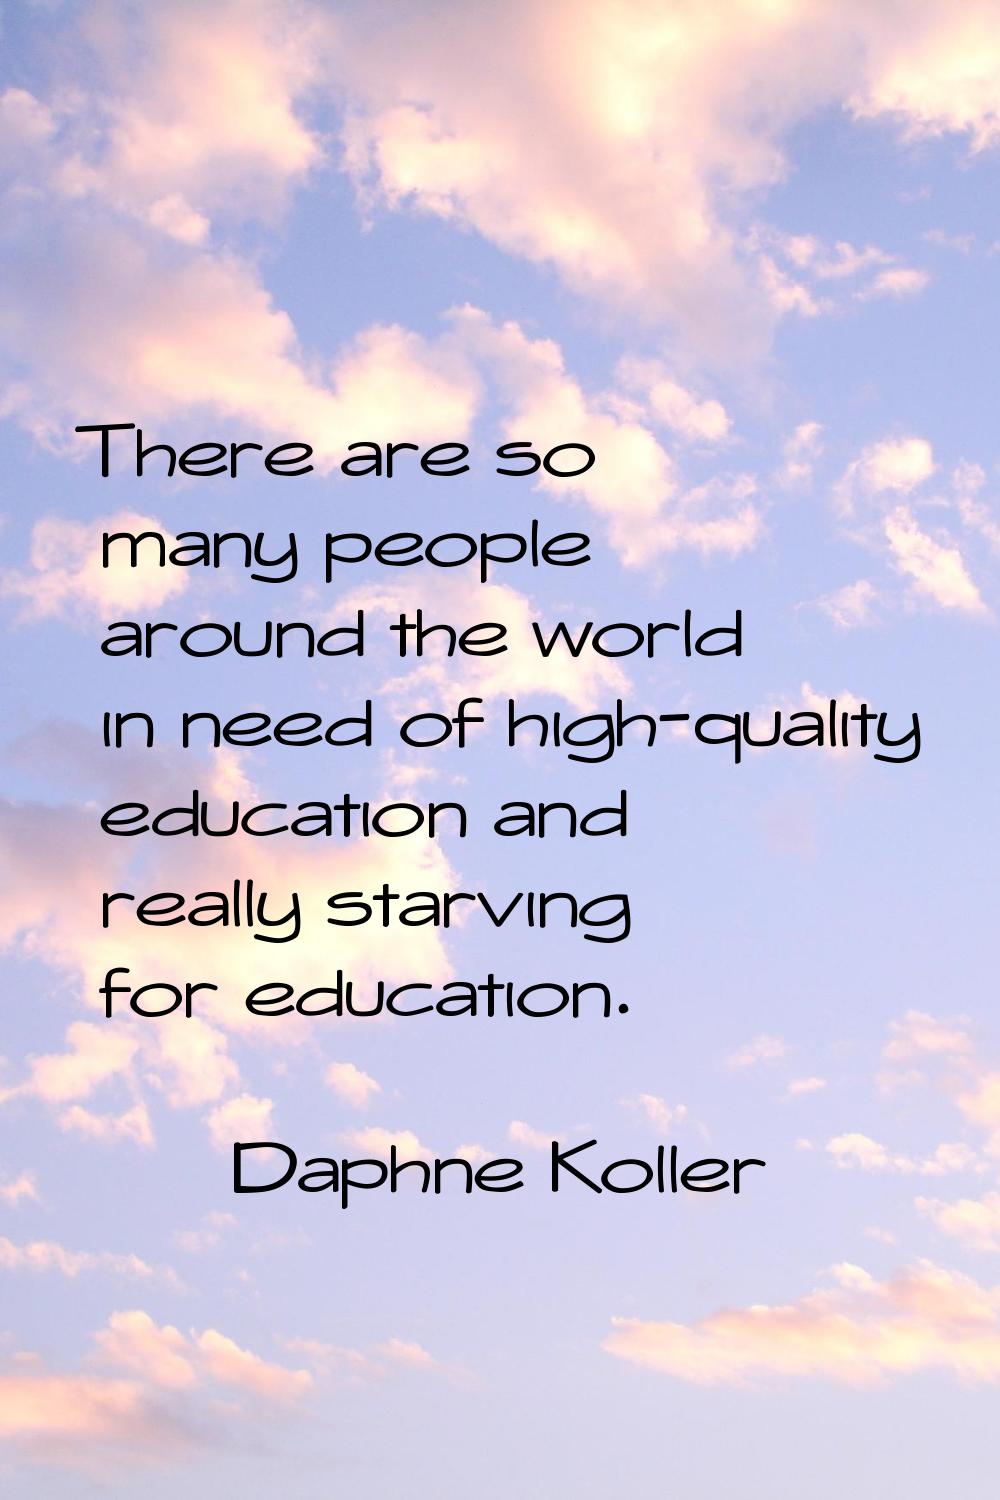 There are so many people around the world in need of high-quality education and really starving for